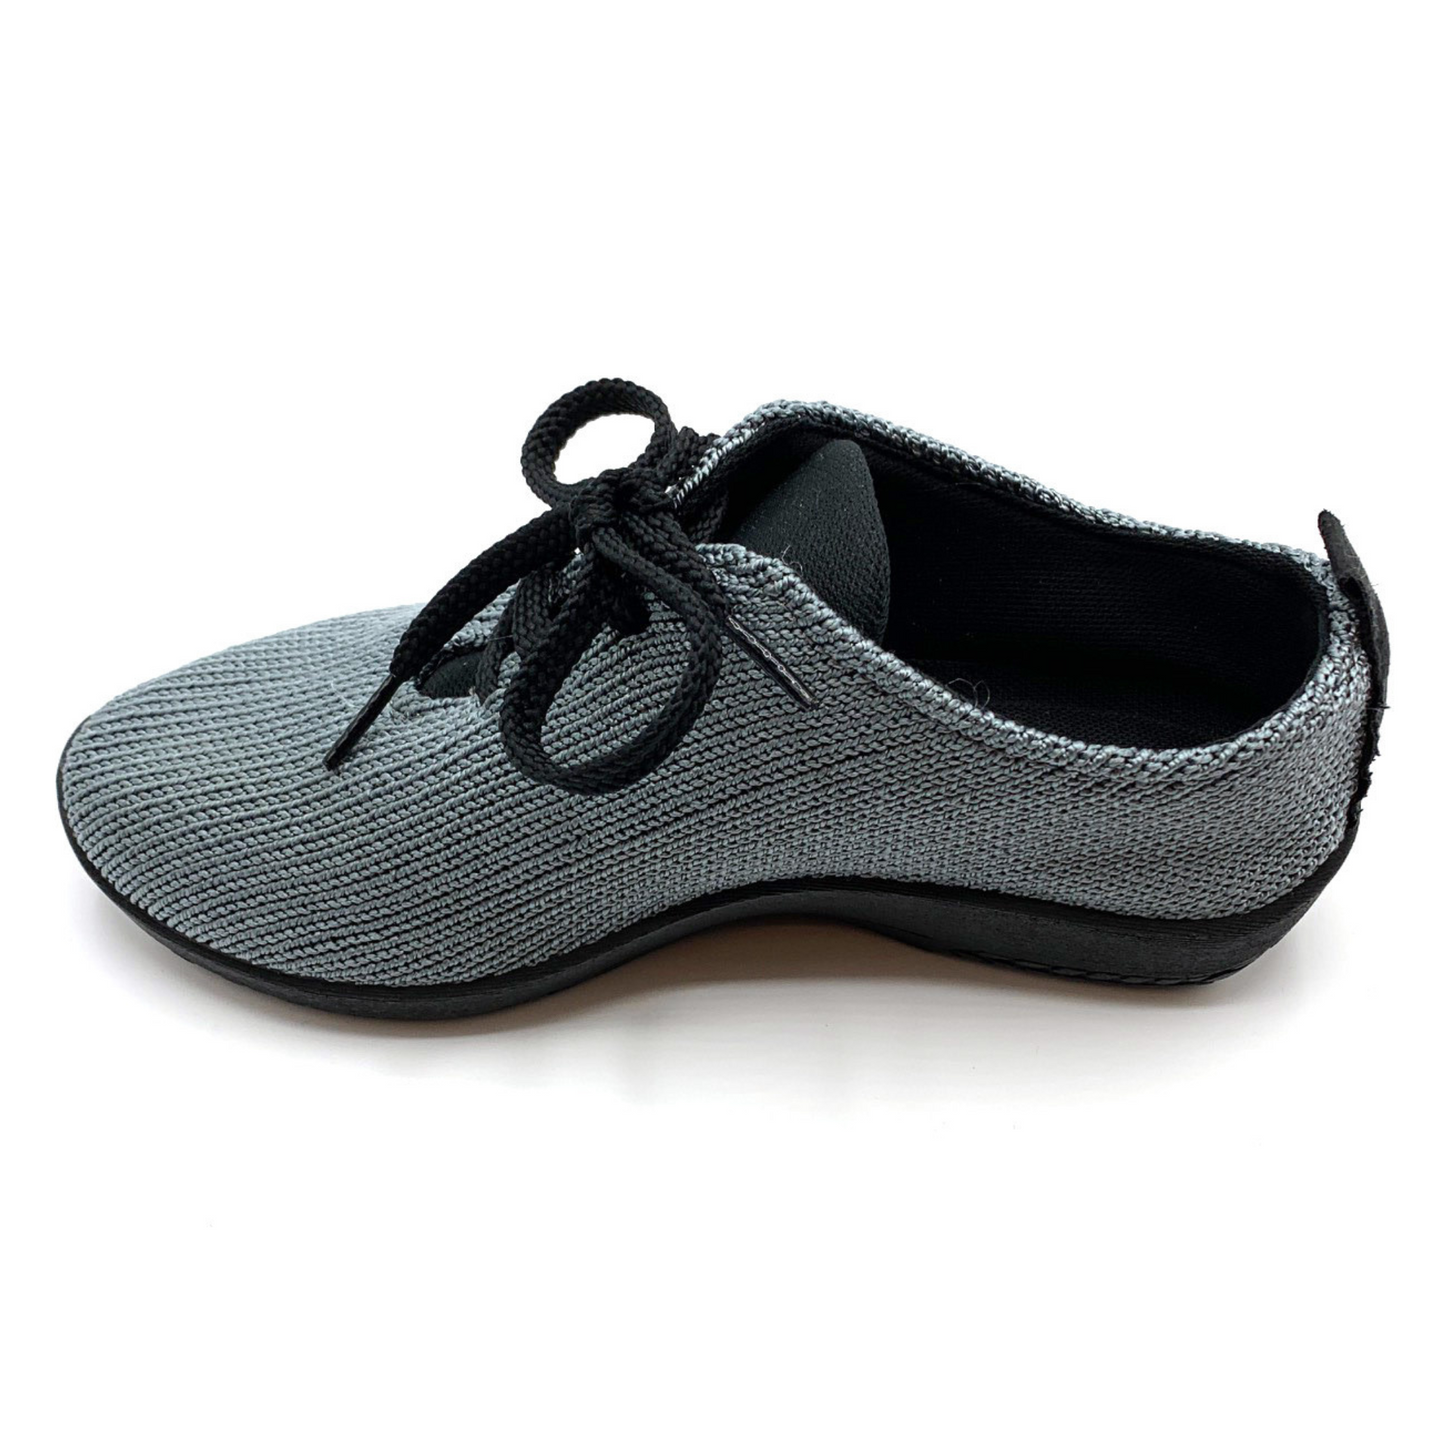 Grey sneaker pictured in profile featuring knit upper, black shoe strings, lining, and sole.